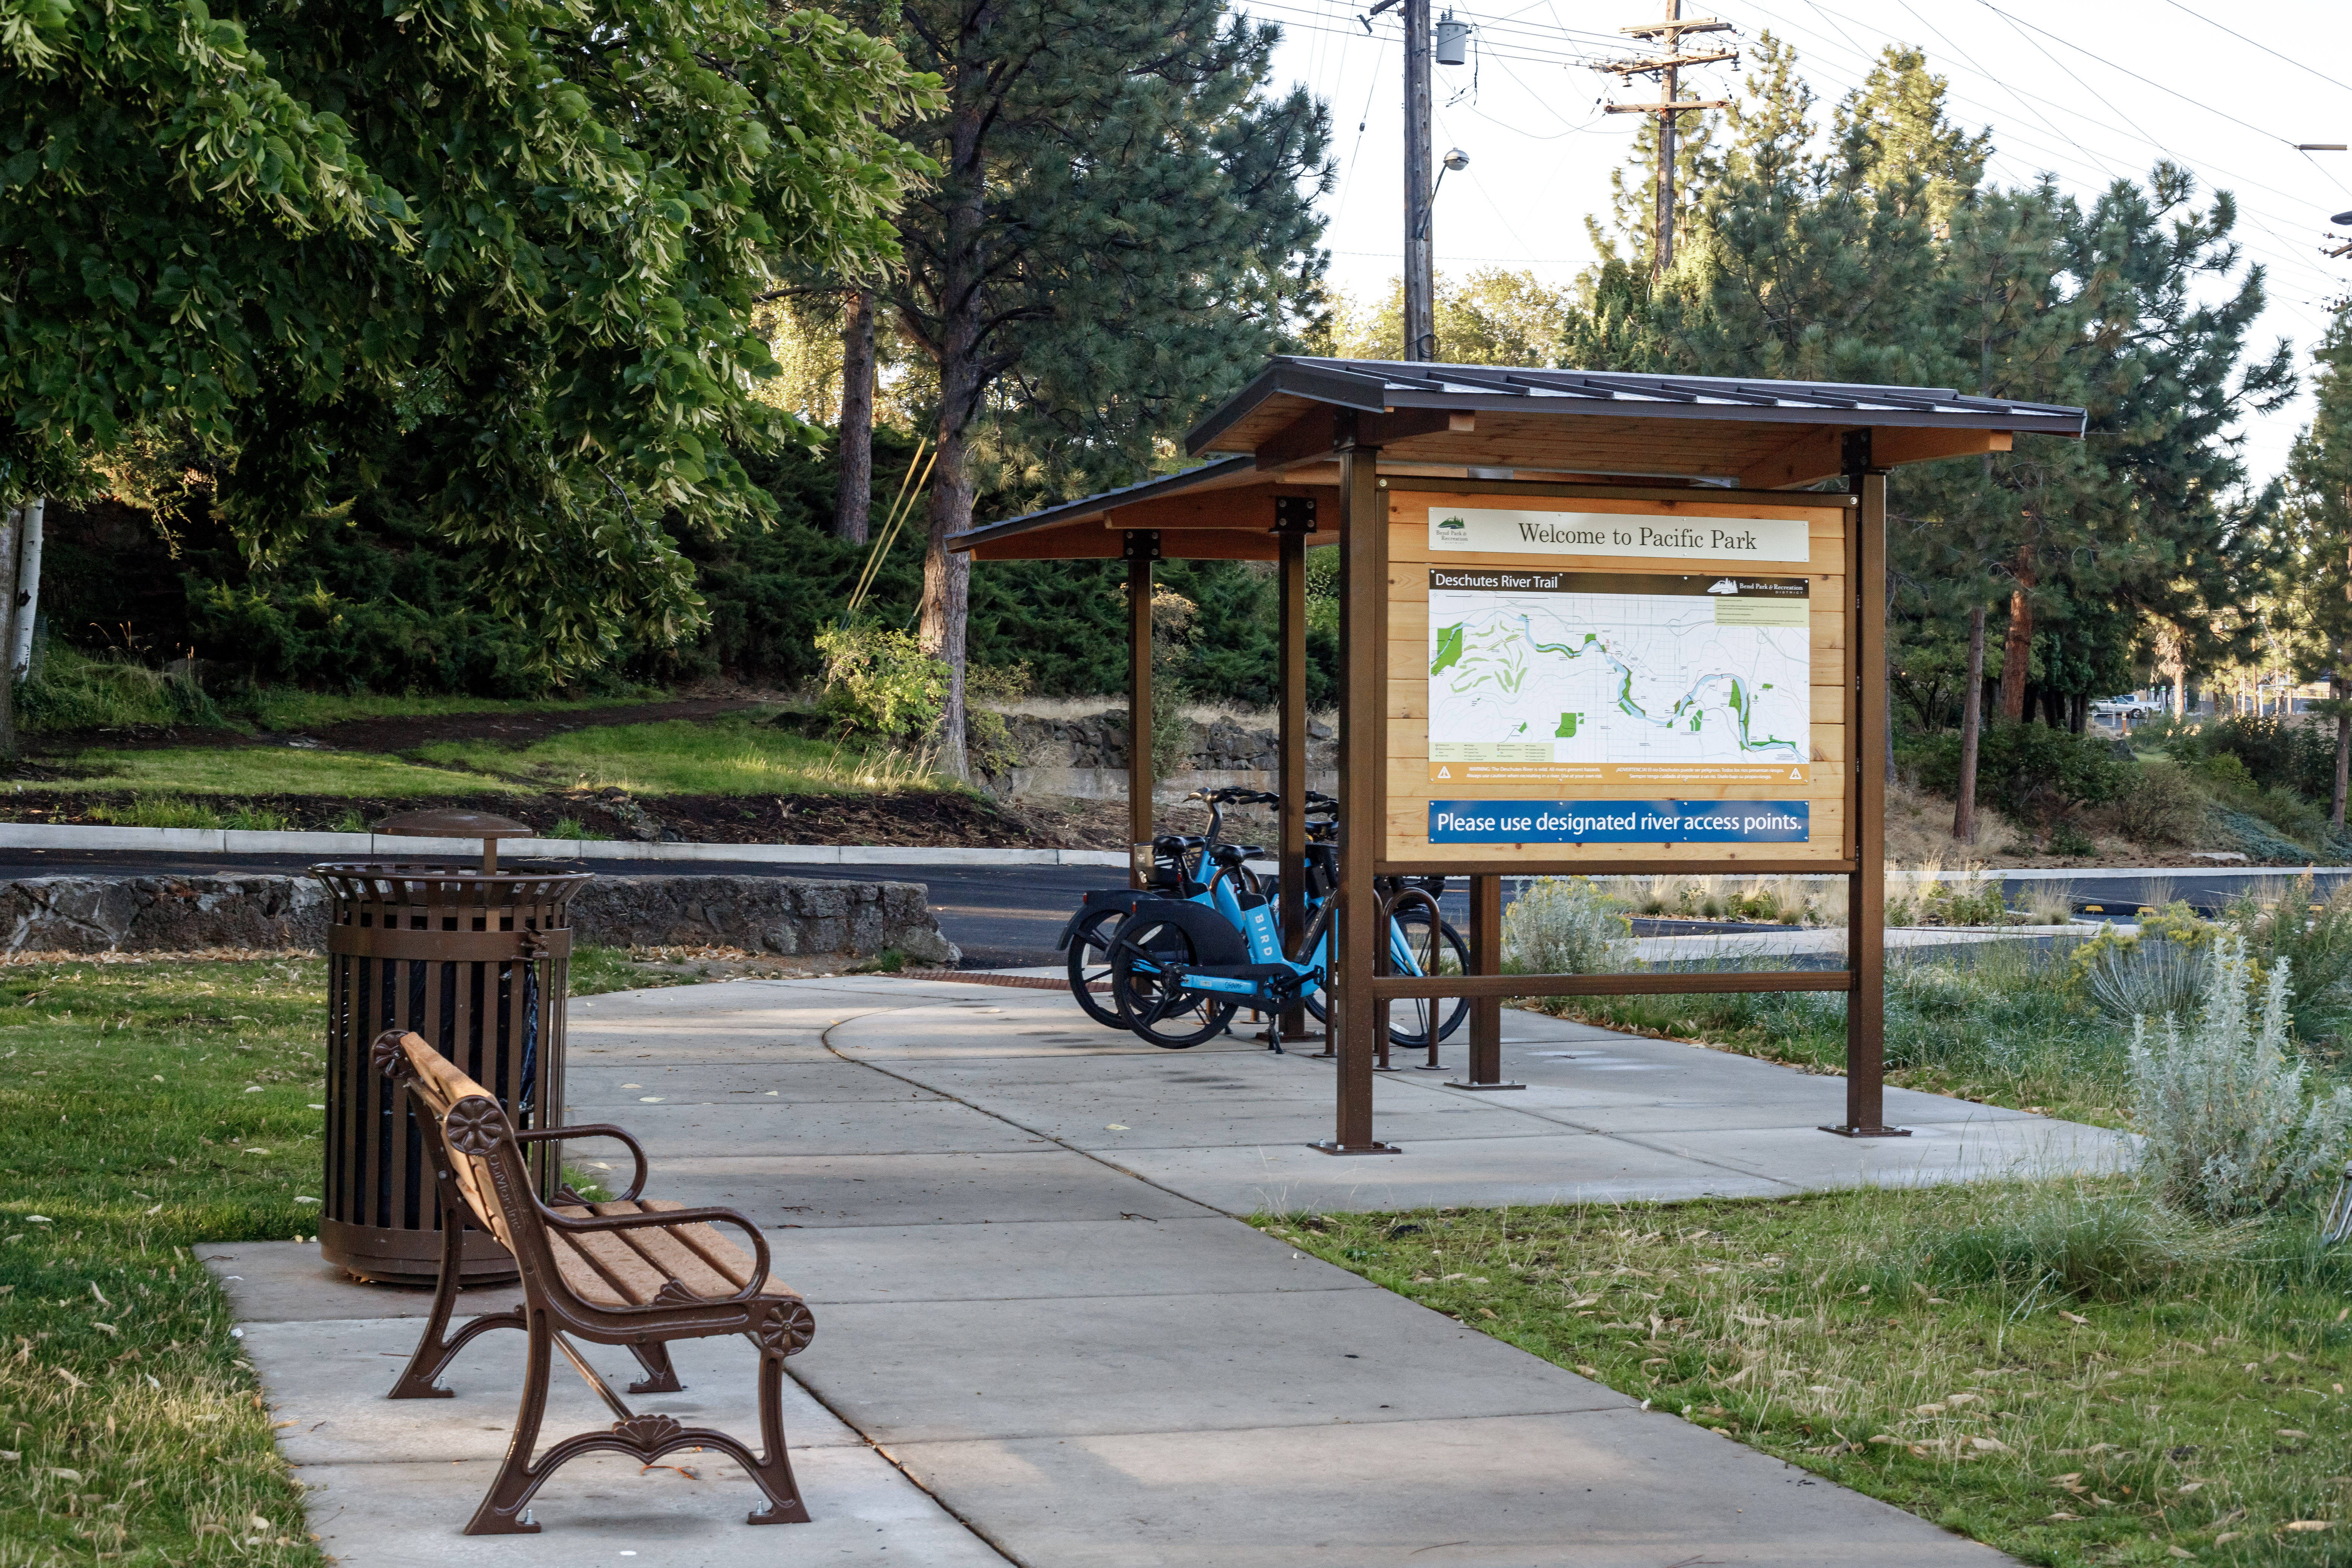 The directional sign kiosk at pacific park